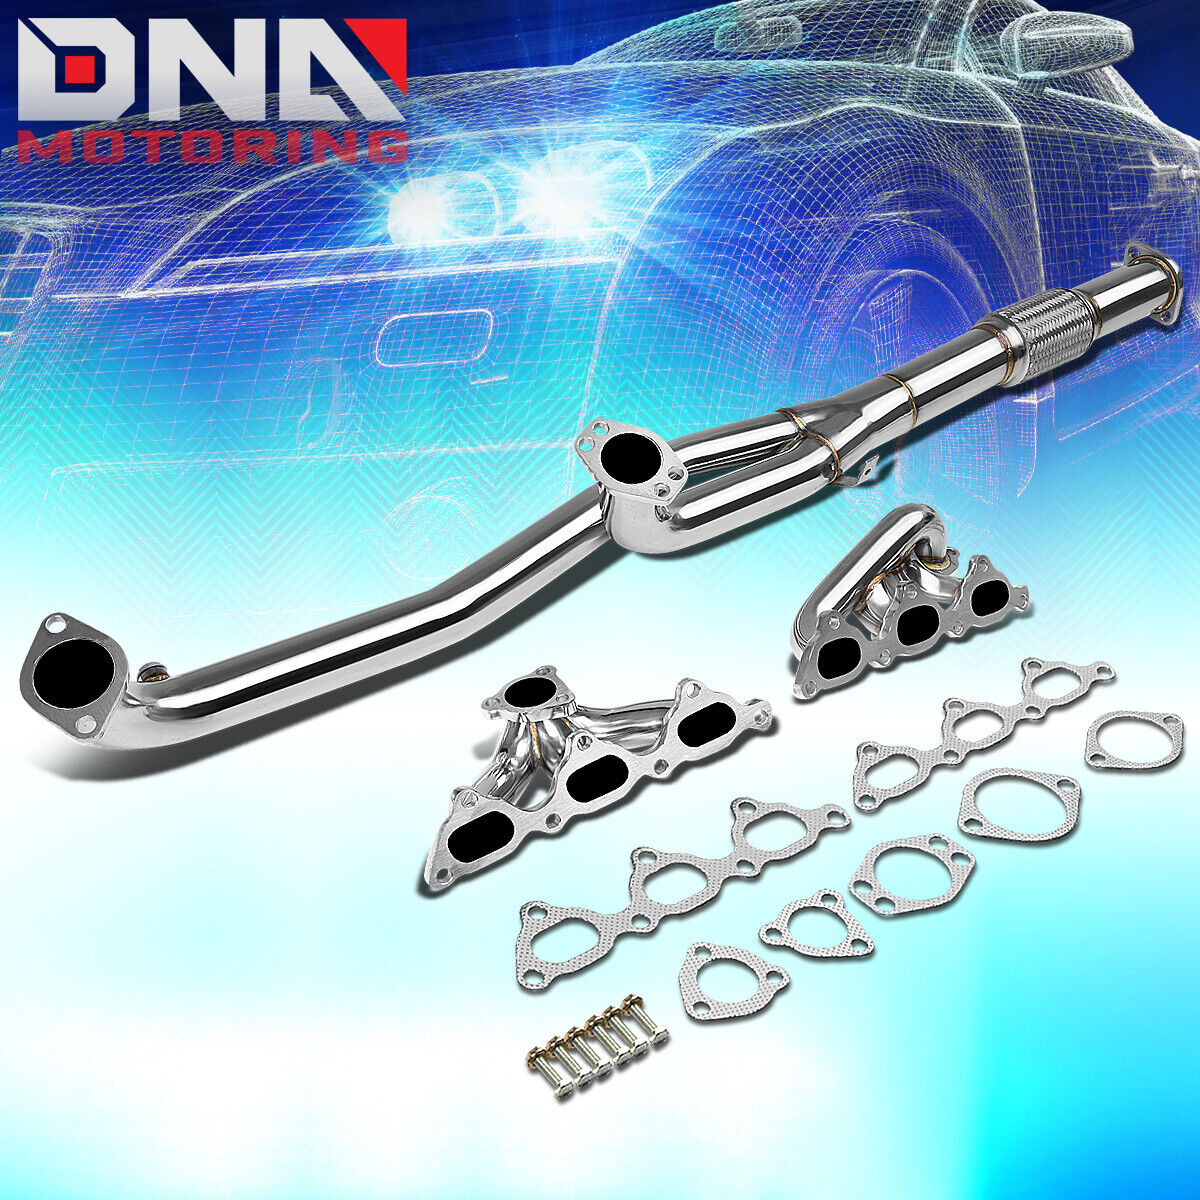 STAINLESS STEEL HEADER+DOWNPIPE FOR 91-99 MIT 3000GT GTO TURBO EXHAUST/MANIFOLD